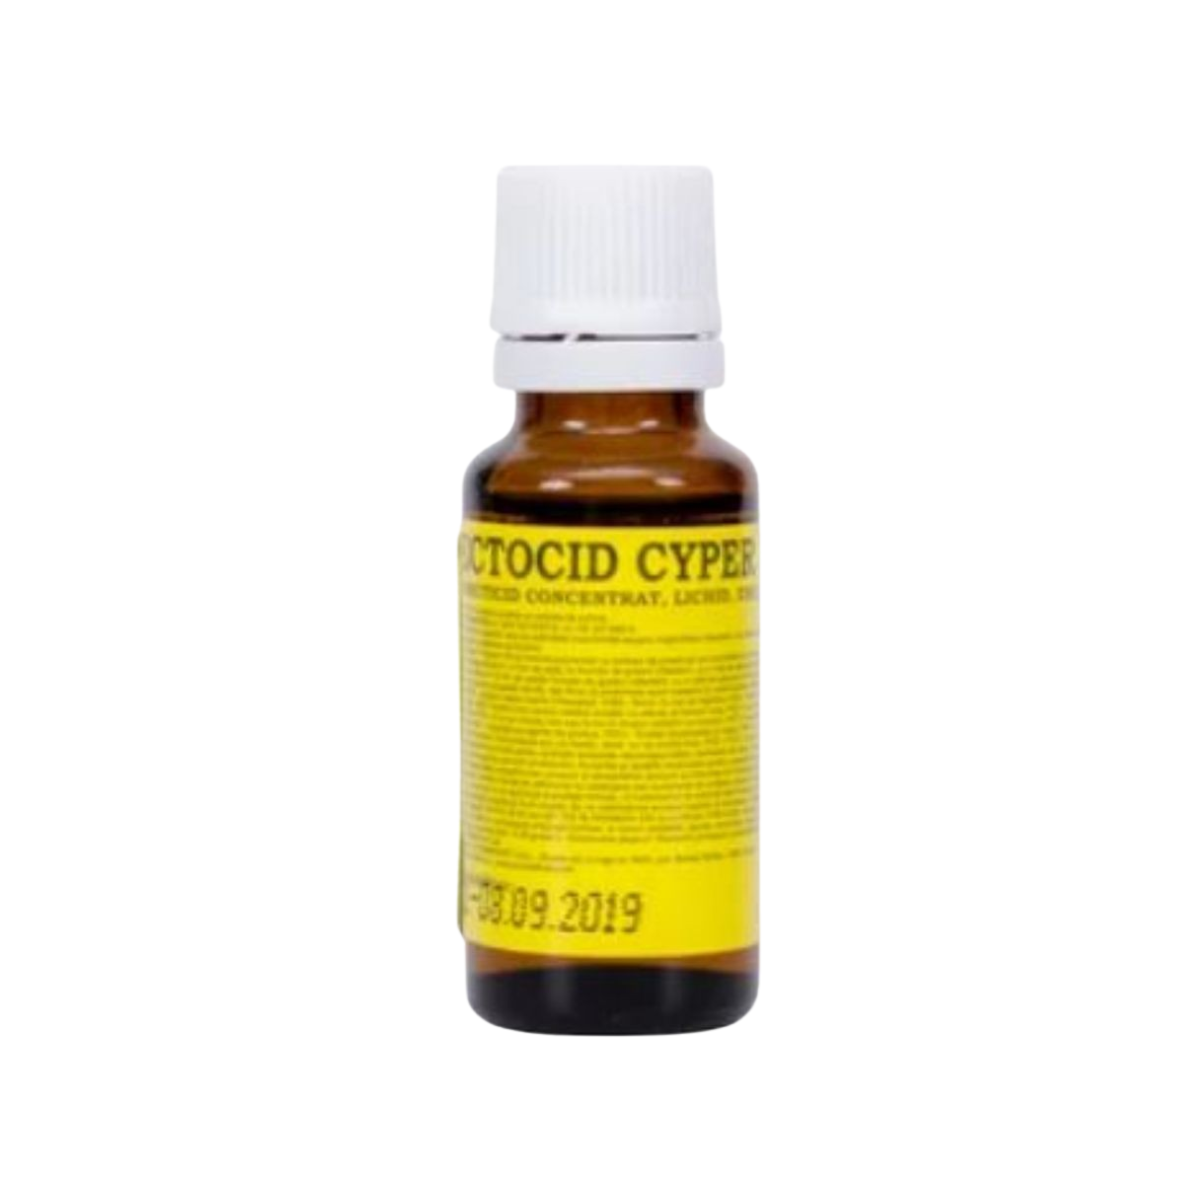 Insecticide - Insecticid  ECTOCID  CYPER 10  20 ml, hectarul.ro